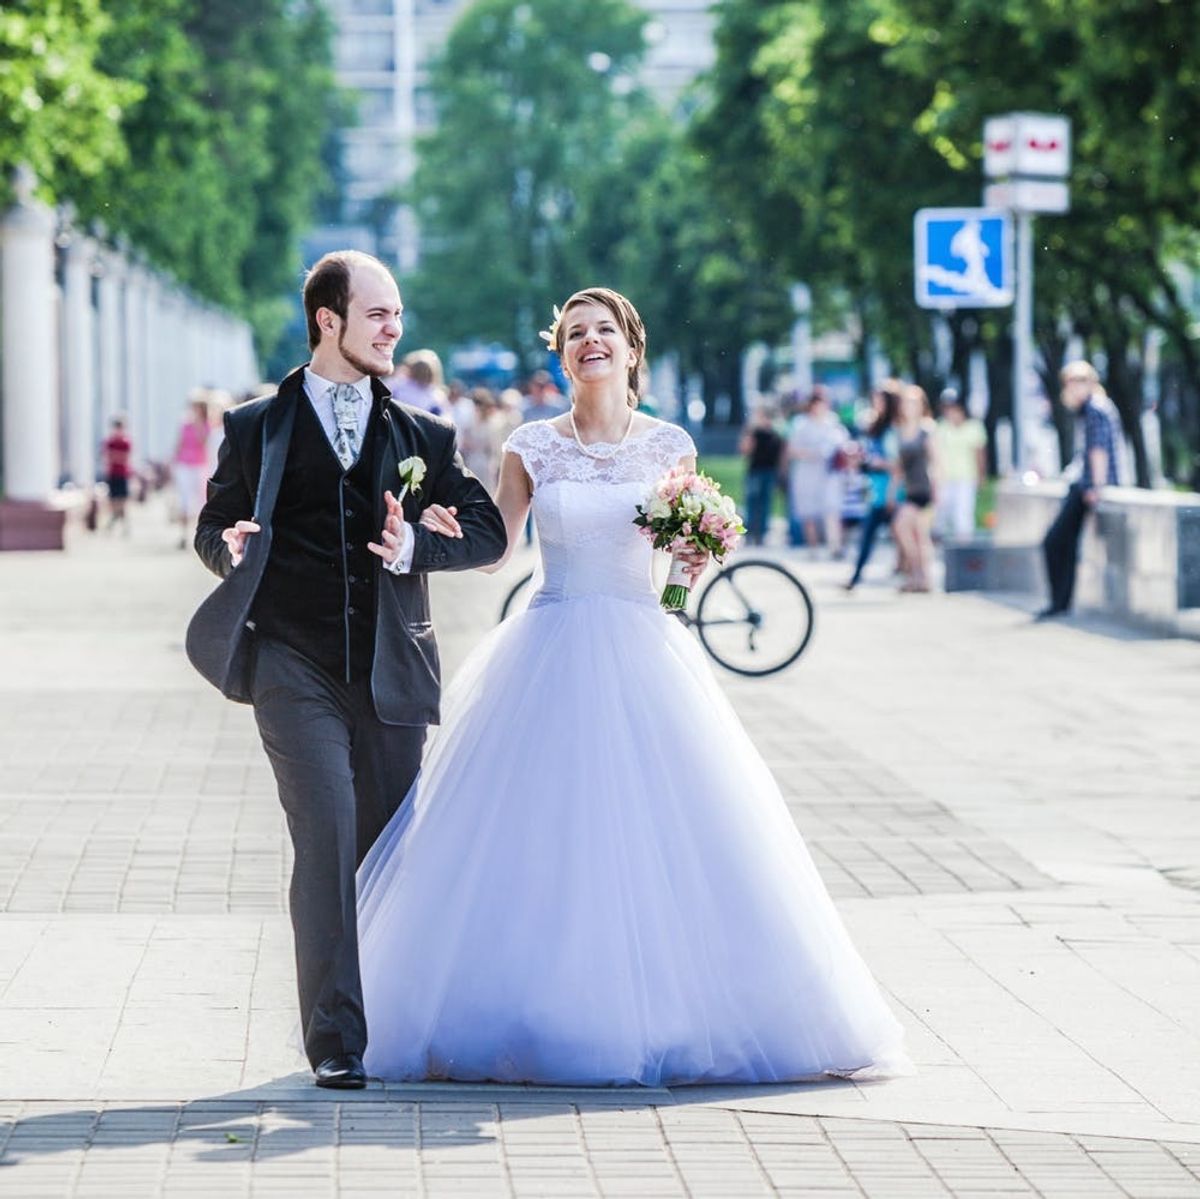 These Are the Best and Worst Cities to Have Your Wedding